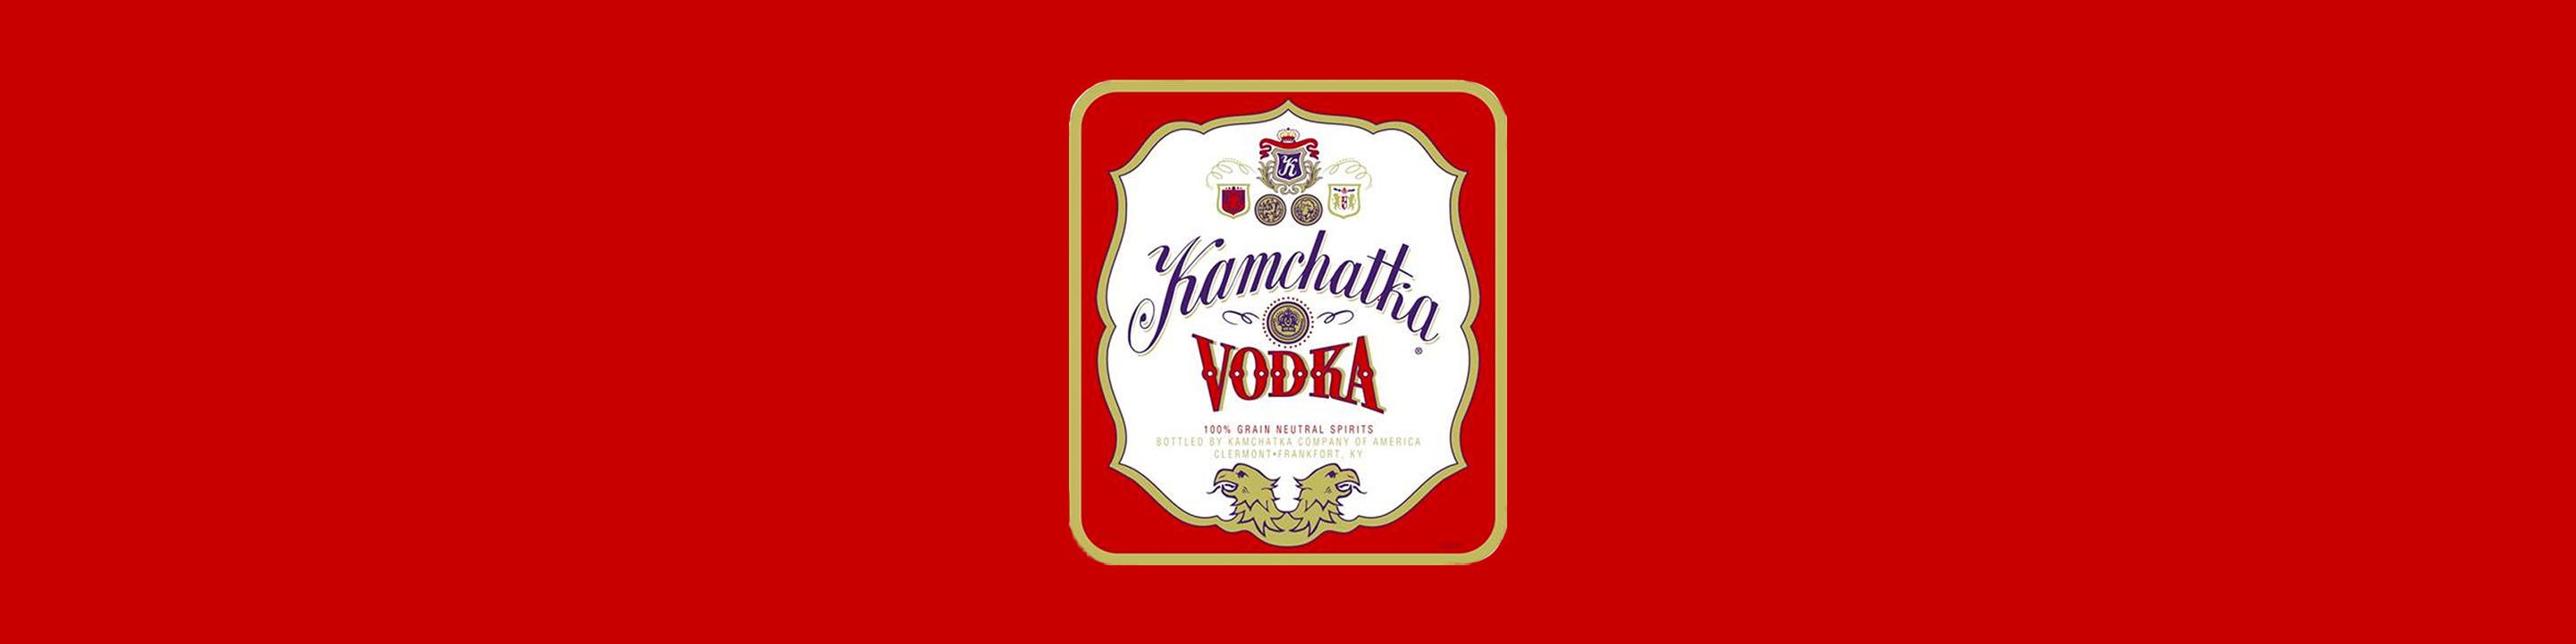 Kamchatka Vodka's smooth, crisp taste makes it excellent year-round for entertaining and mixability. The perfect addition to any home bar, its clean and smooth character make it the perfect mixer for a variety of cocktails, including the Bloody Mary, Vodka Tonic and other classic drinks. Enjoy premium taste at a value price.

Buy Kamchatka online now from nearby liquor stores via Minibar Delivery.